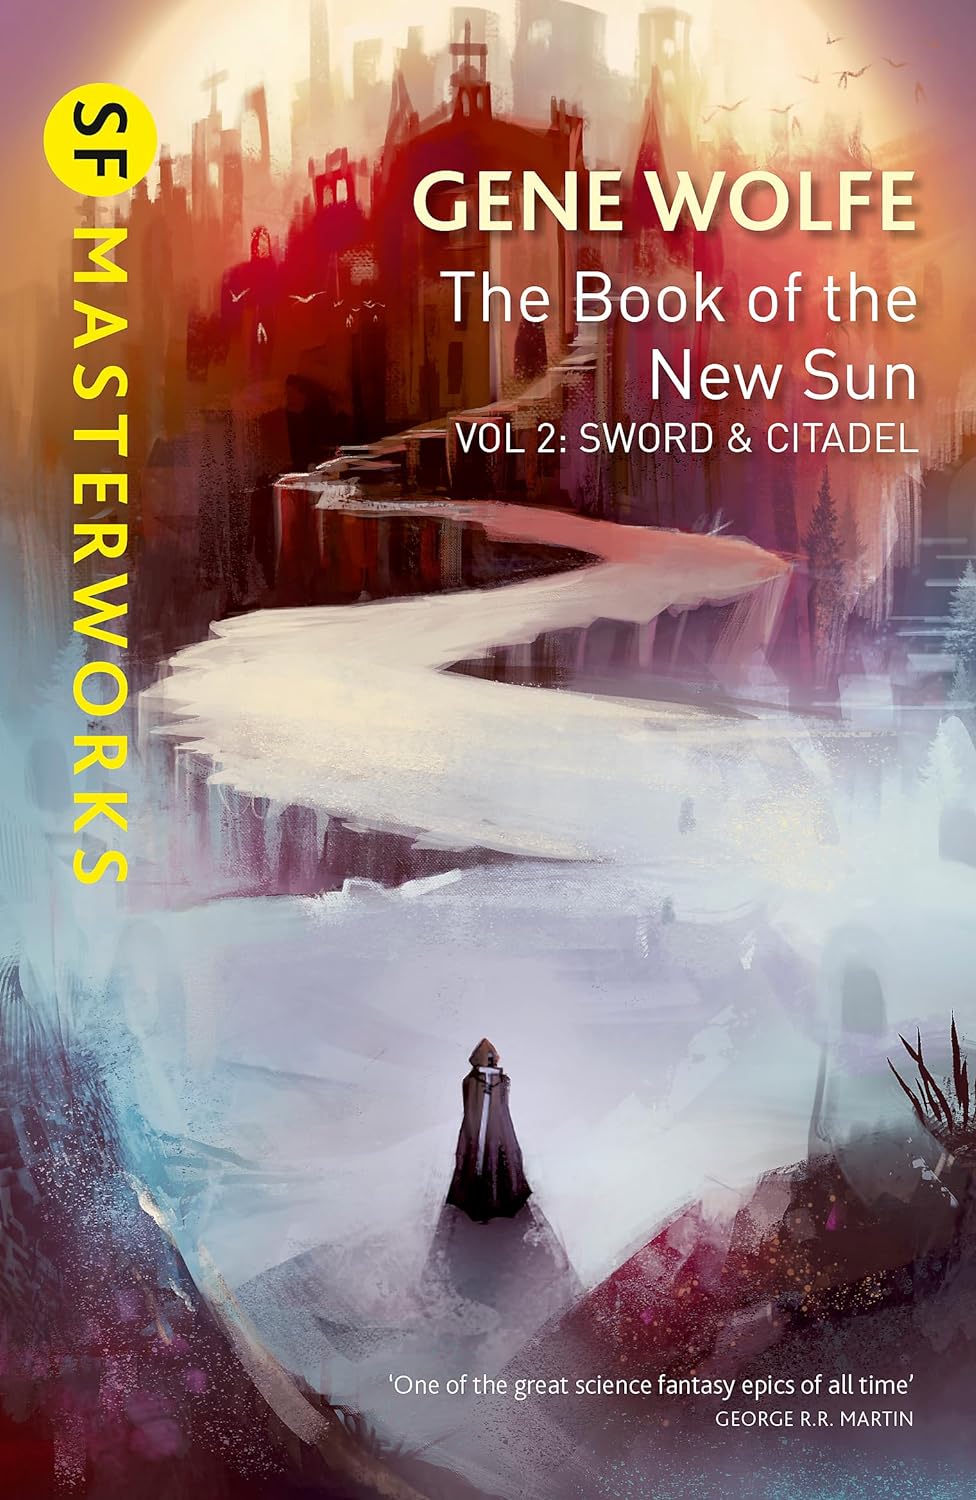 The Book of the New Sun. Volume 2: Sword and Citadel | Gene Wolfe